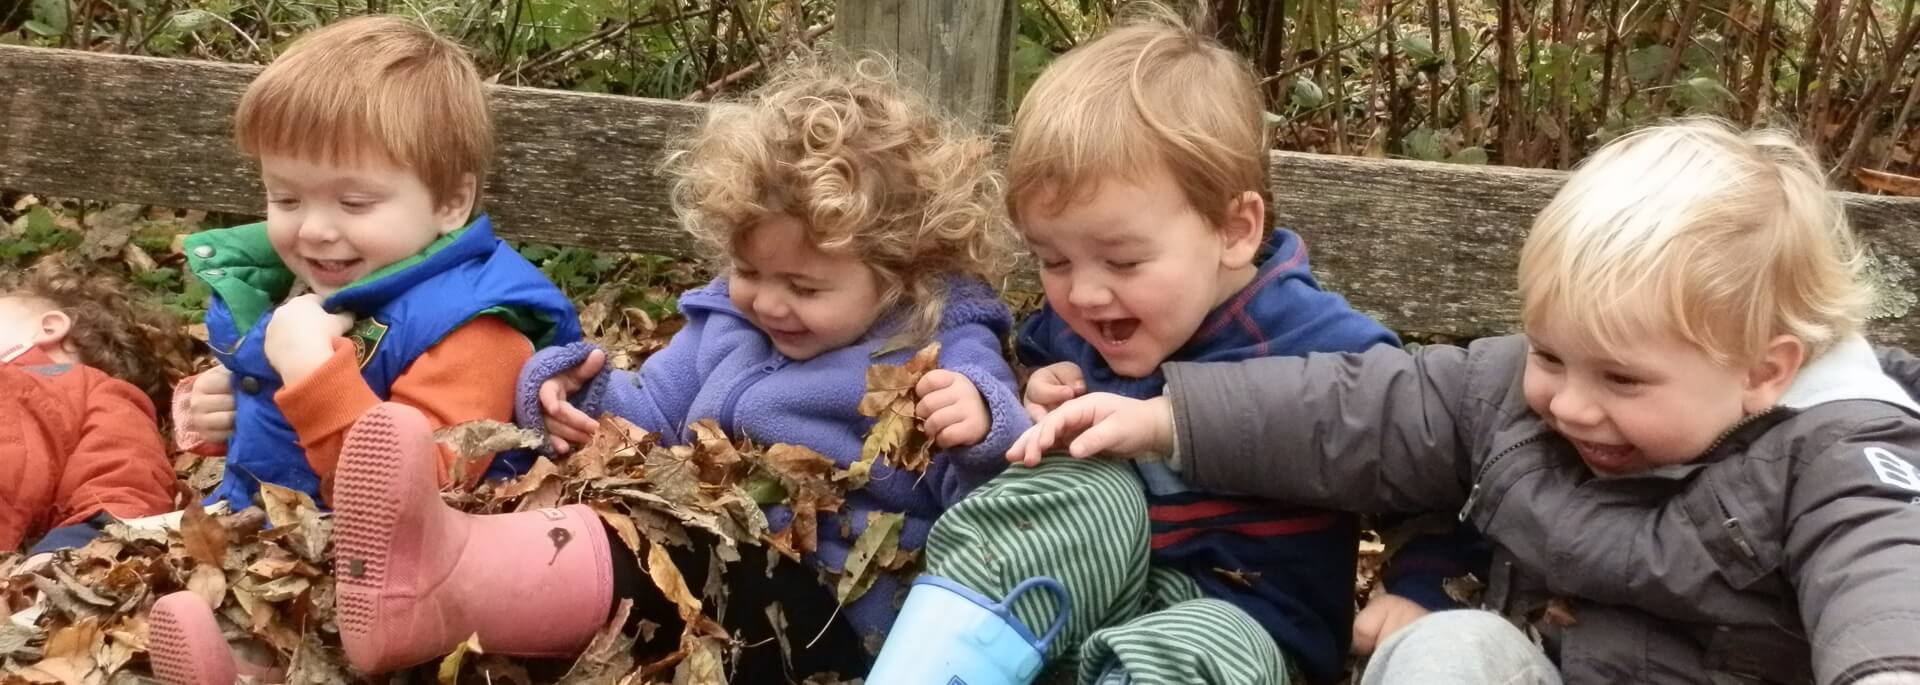 Toddlers playing outside.